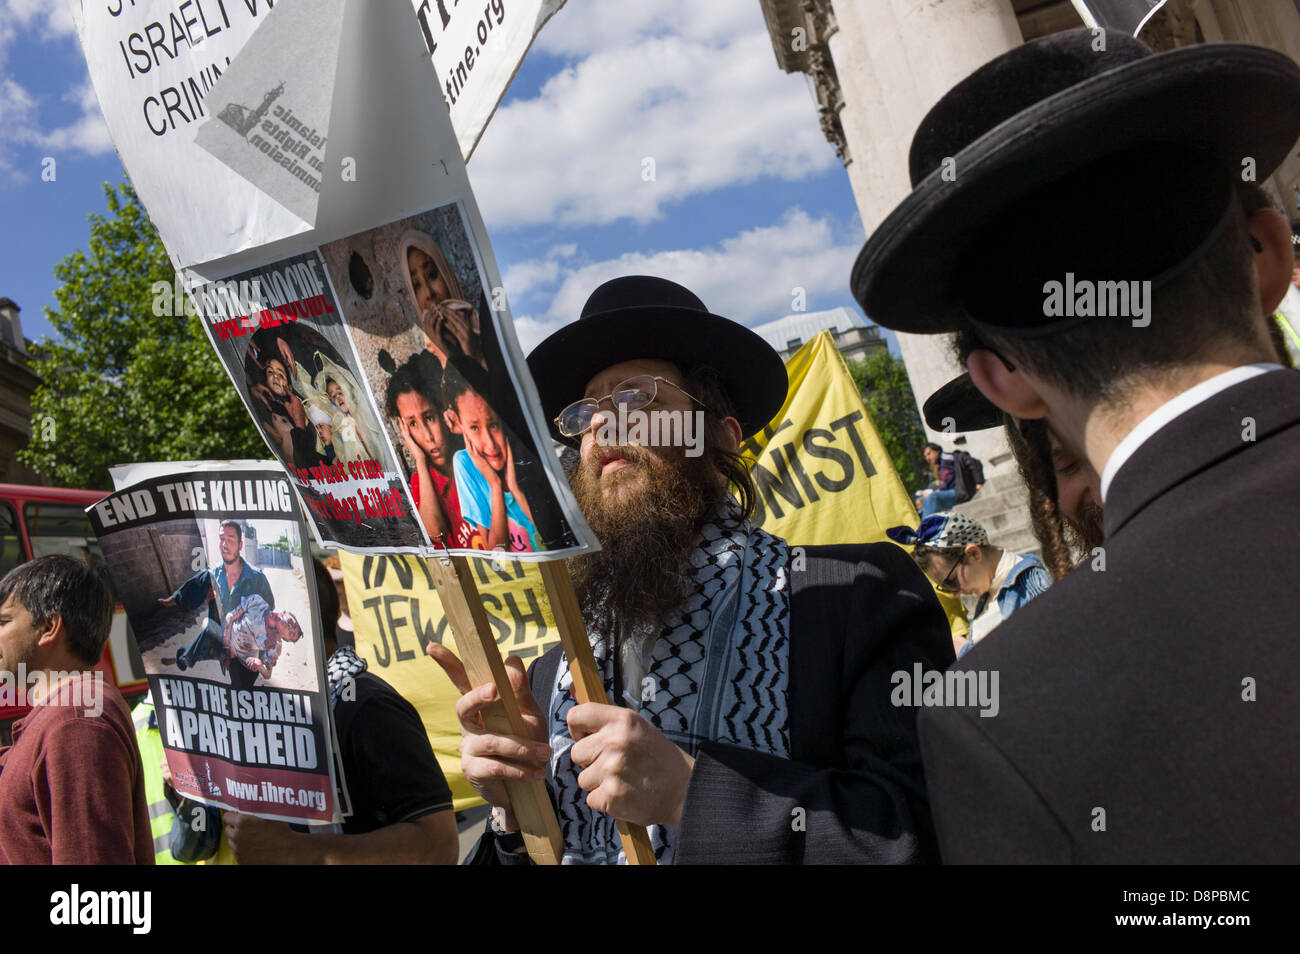 London, UK. 2nd June, 2013. Neturei Karta, Ultra Orthodox Jews, demonstrate alongside the Islamic Human Rights Commissions against Israel at the Closer to Israel 65 celebrating the 65 years of the foundation of the state of Israel in 1948 in Trafalgar Square London. Credit:  Rena Pearl/Alamy Live News Stock Photo